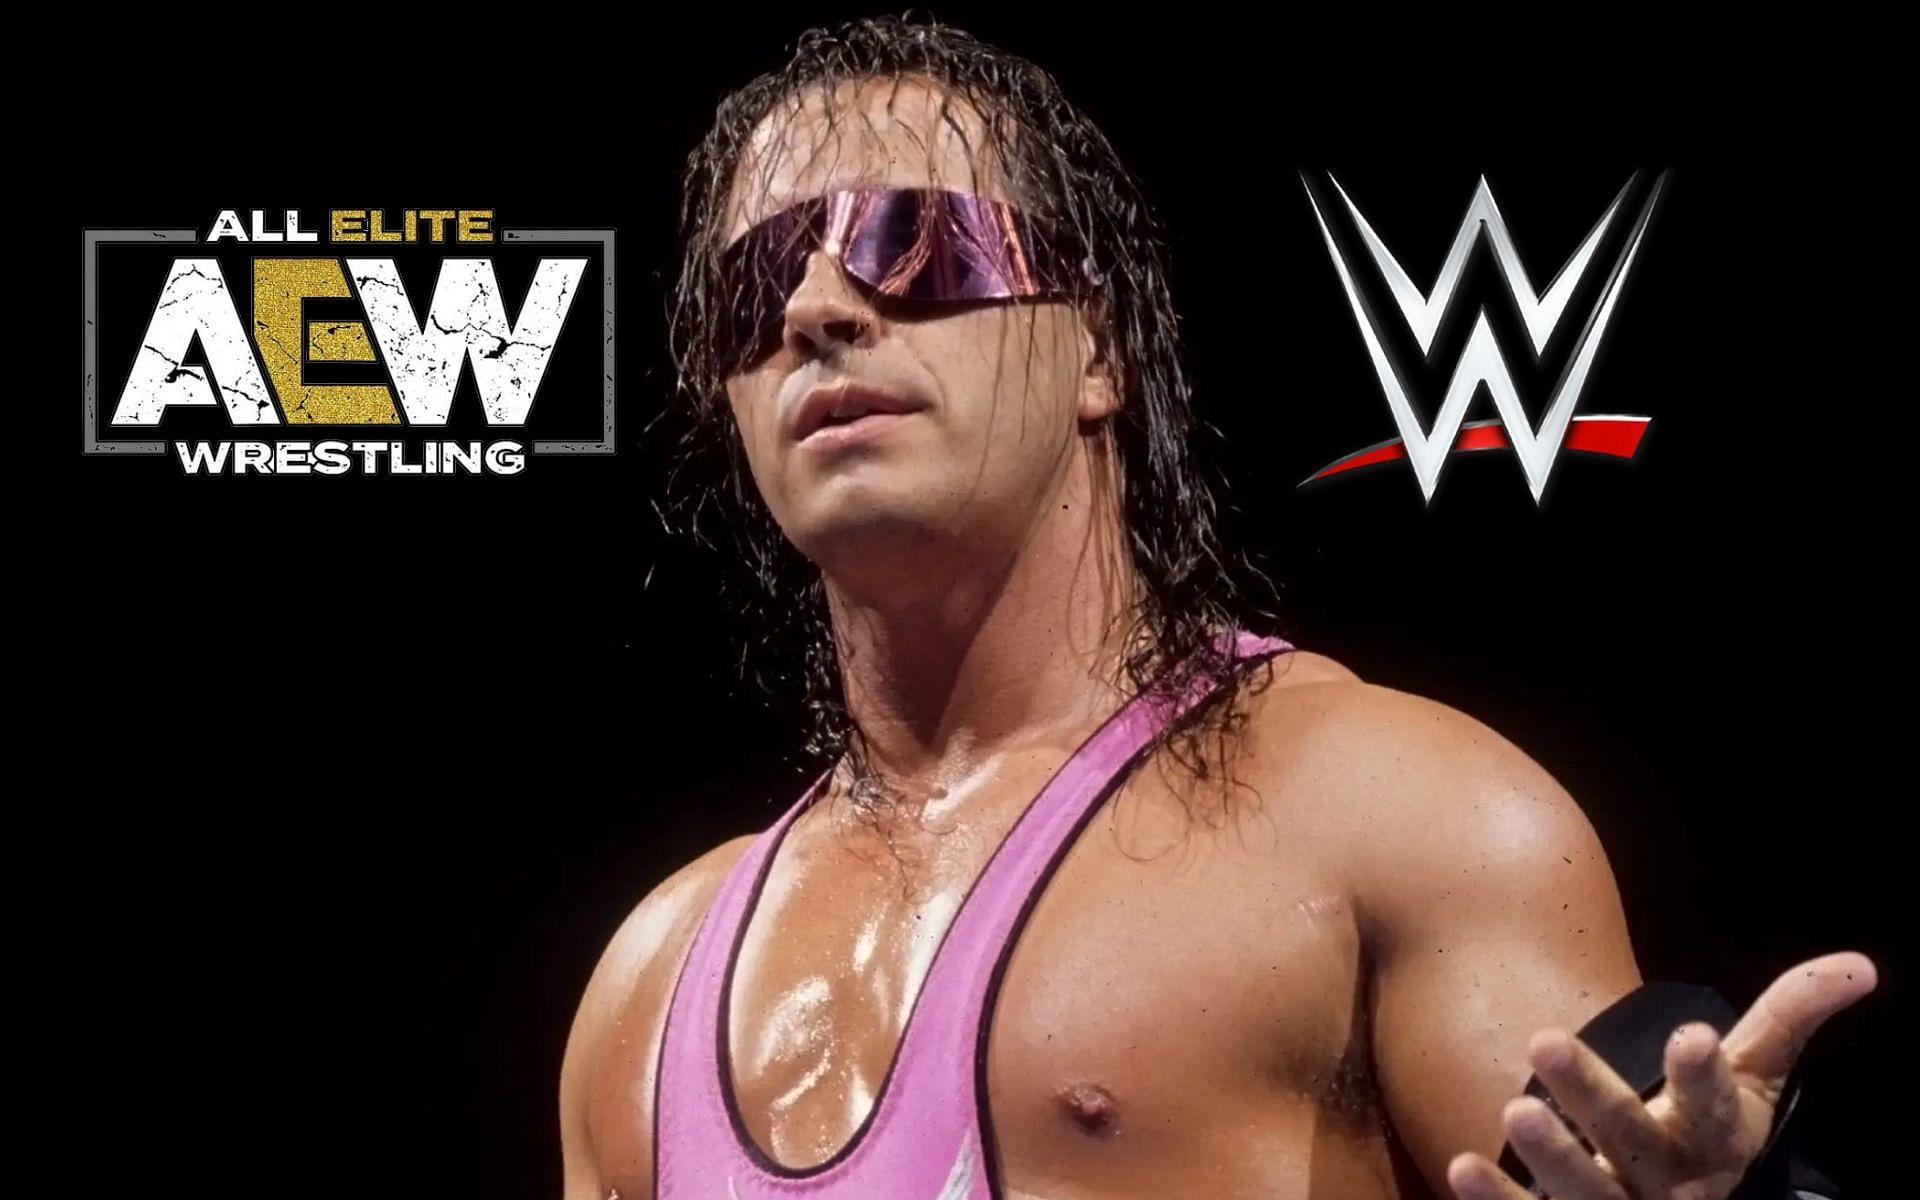 WWE Hall of Famer Bret Hart is a staunch supporter of this AEW tag team.